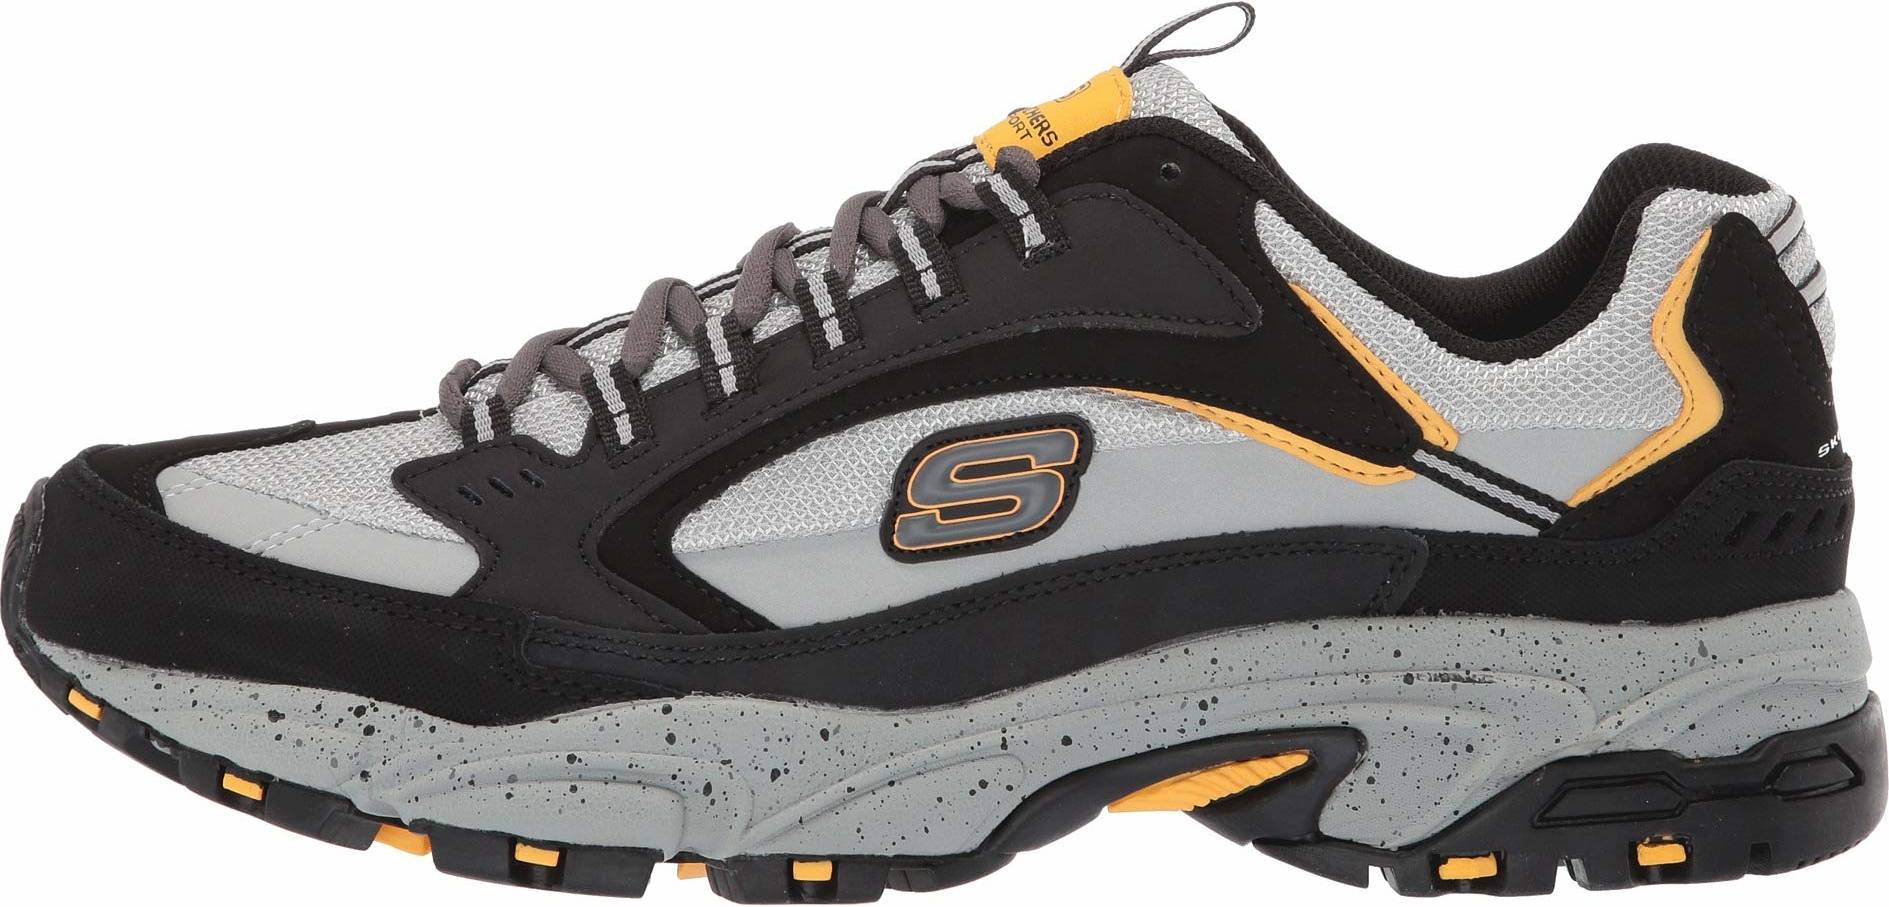 Save 48% on Wide Workout Shoes (30 